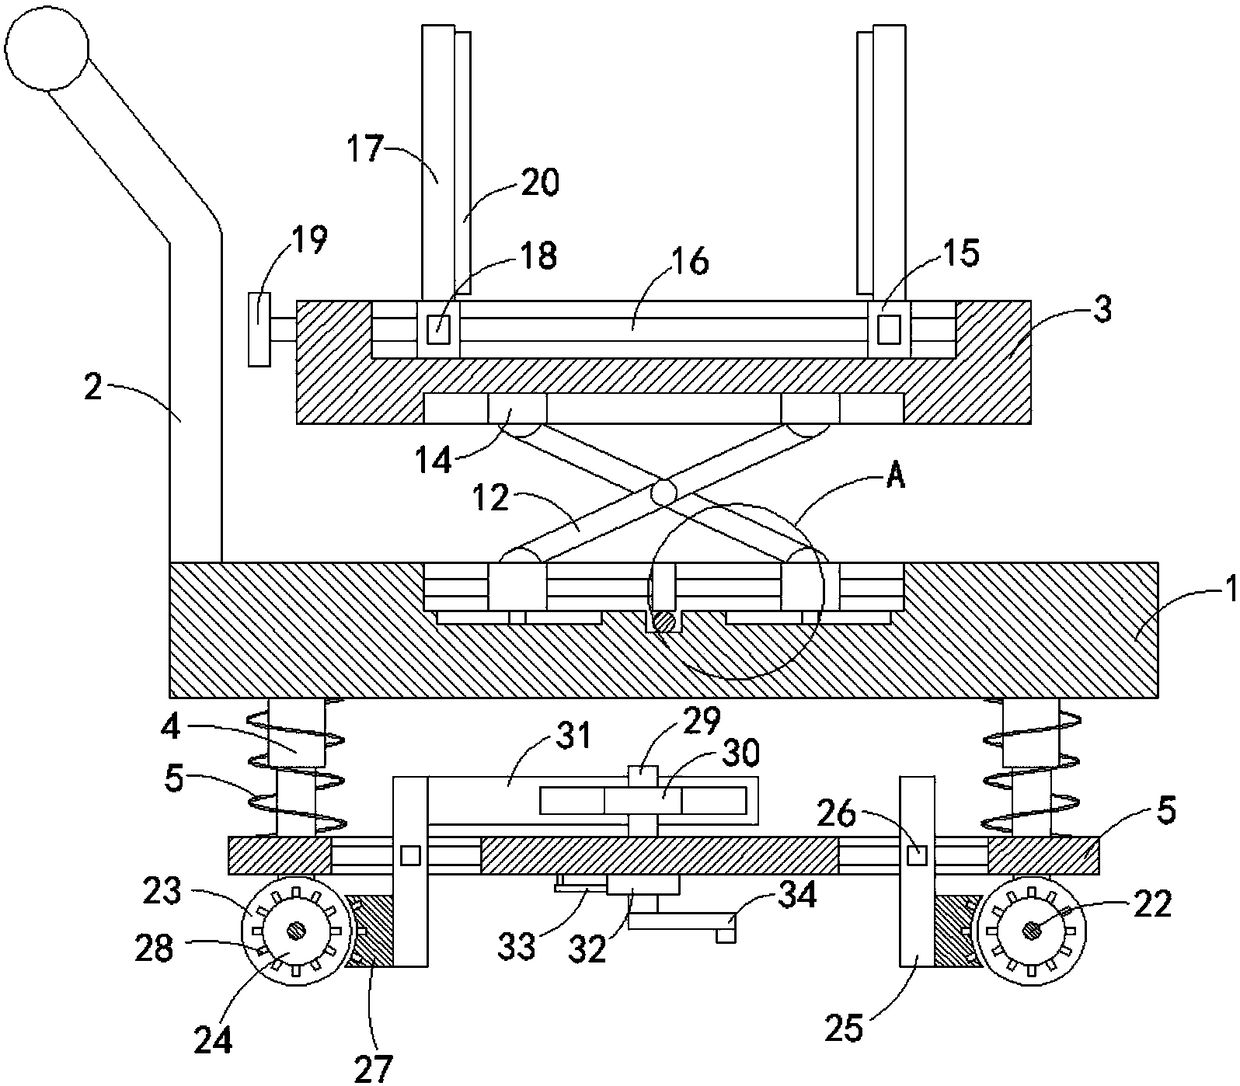 Power equipment transporting vehicle convenient to load and unload